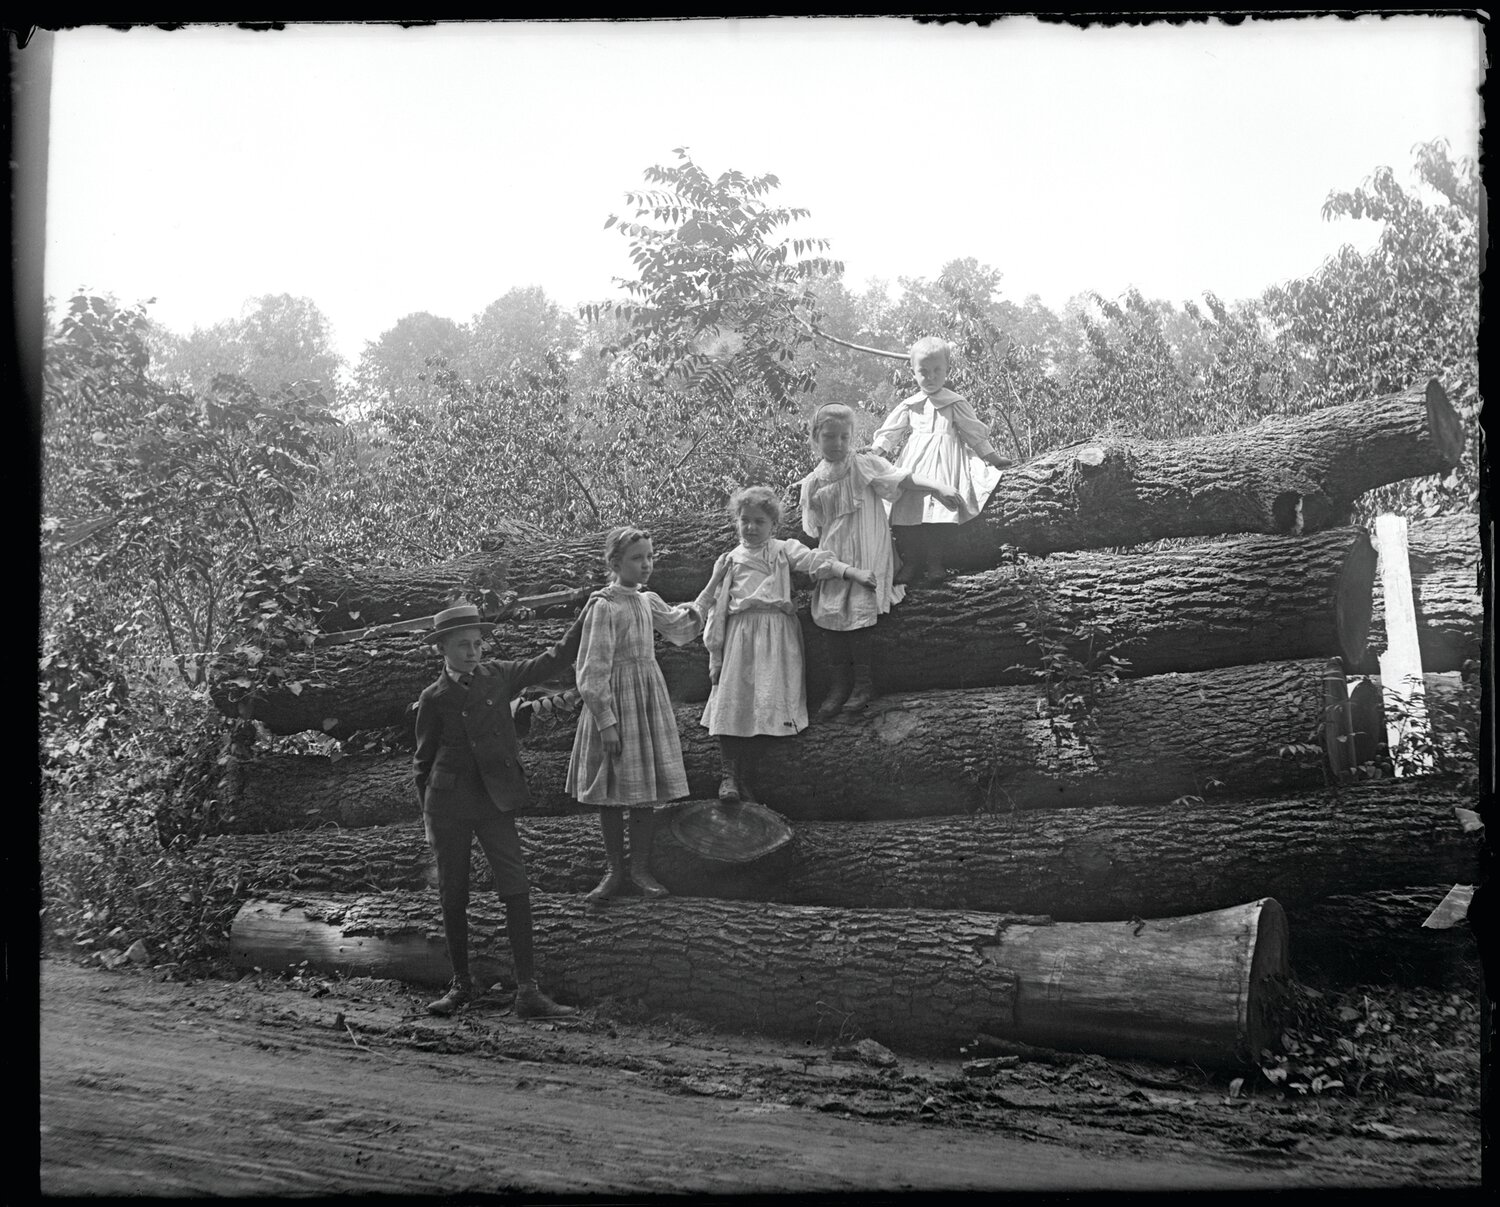 Maxwell Stover, left, and sisters posing on logs in Erwinna, on Aug. 29, 1897. The digital print is from Grant Castner’s original 4-by-5 glass plate negative, a gift of Robert R. Jones in memory of William R. Paquin.